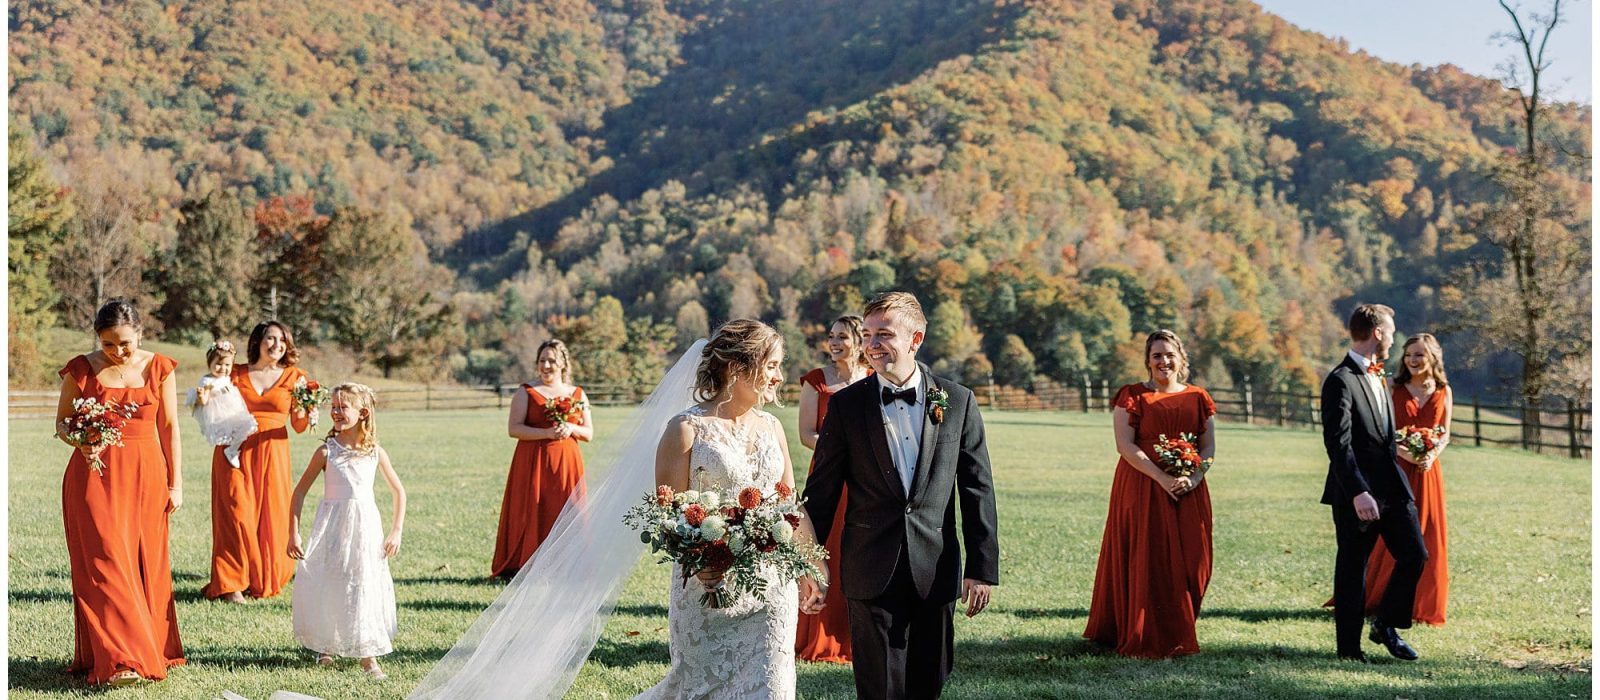 A bride and groom walk hand-in-hand at their outdoor wedding, with bridesmaids in orange dresses and groomsmen in the background, all against a backdrop of autumn mountains.